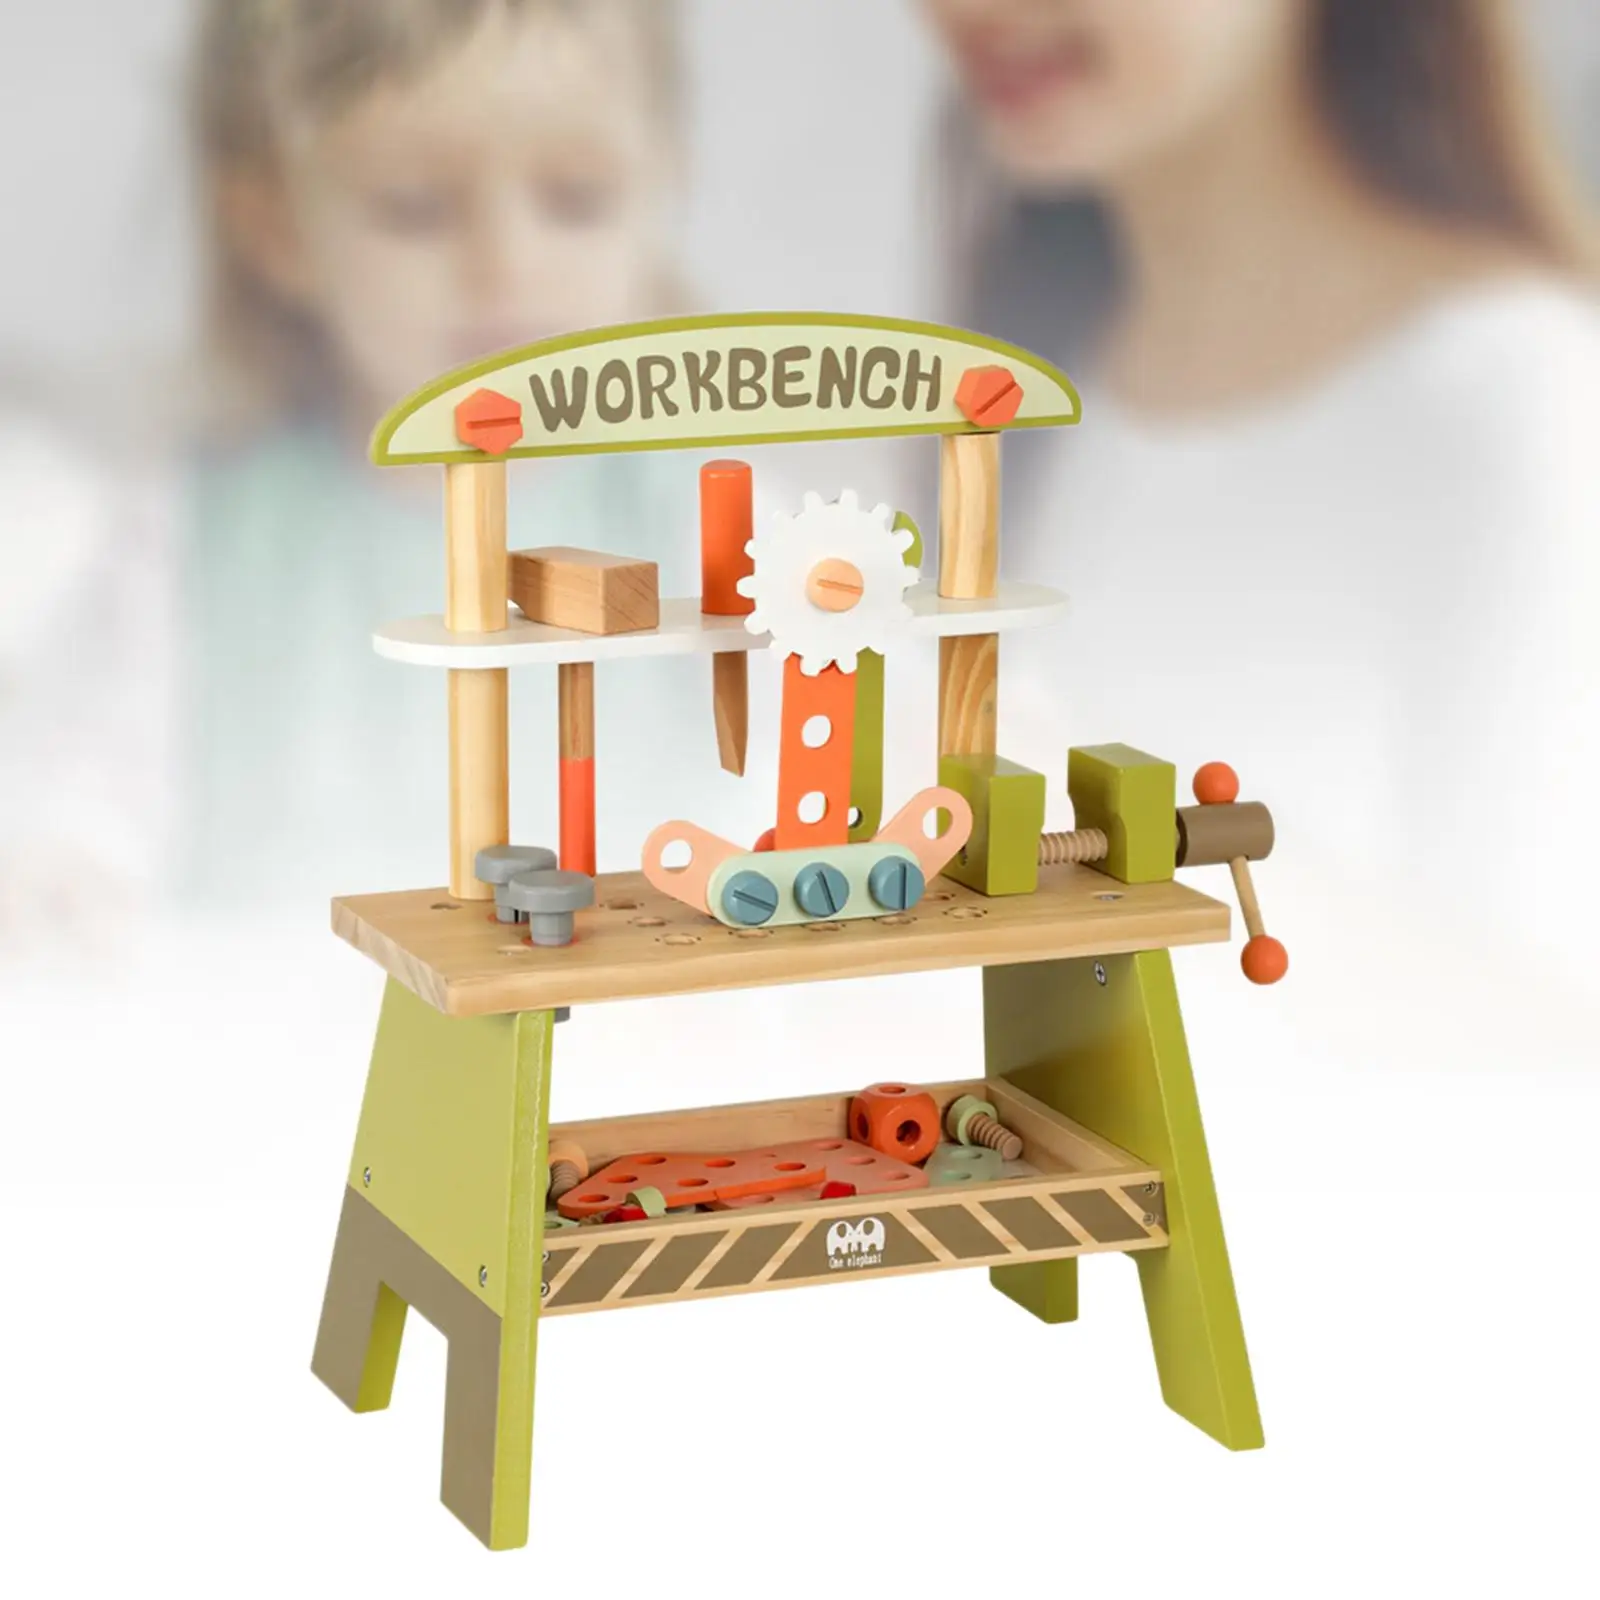 Kid`s Wooden Tool Bench Toy Educational Simulation Durable Children Repair Play Tool Set for Ages 3+ Girls Boys Easy to Assemble